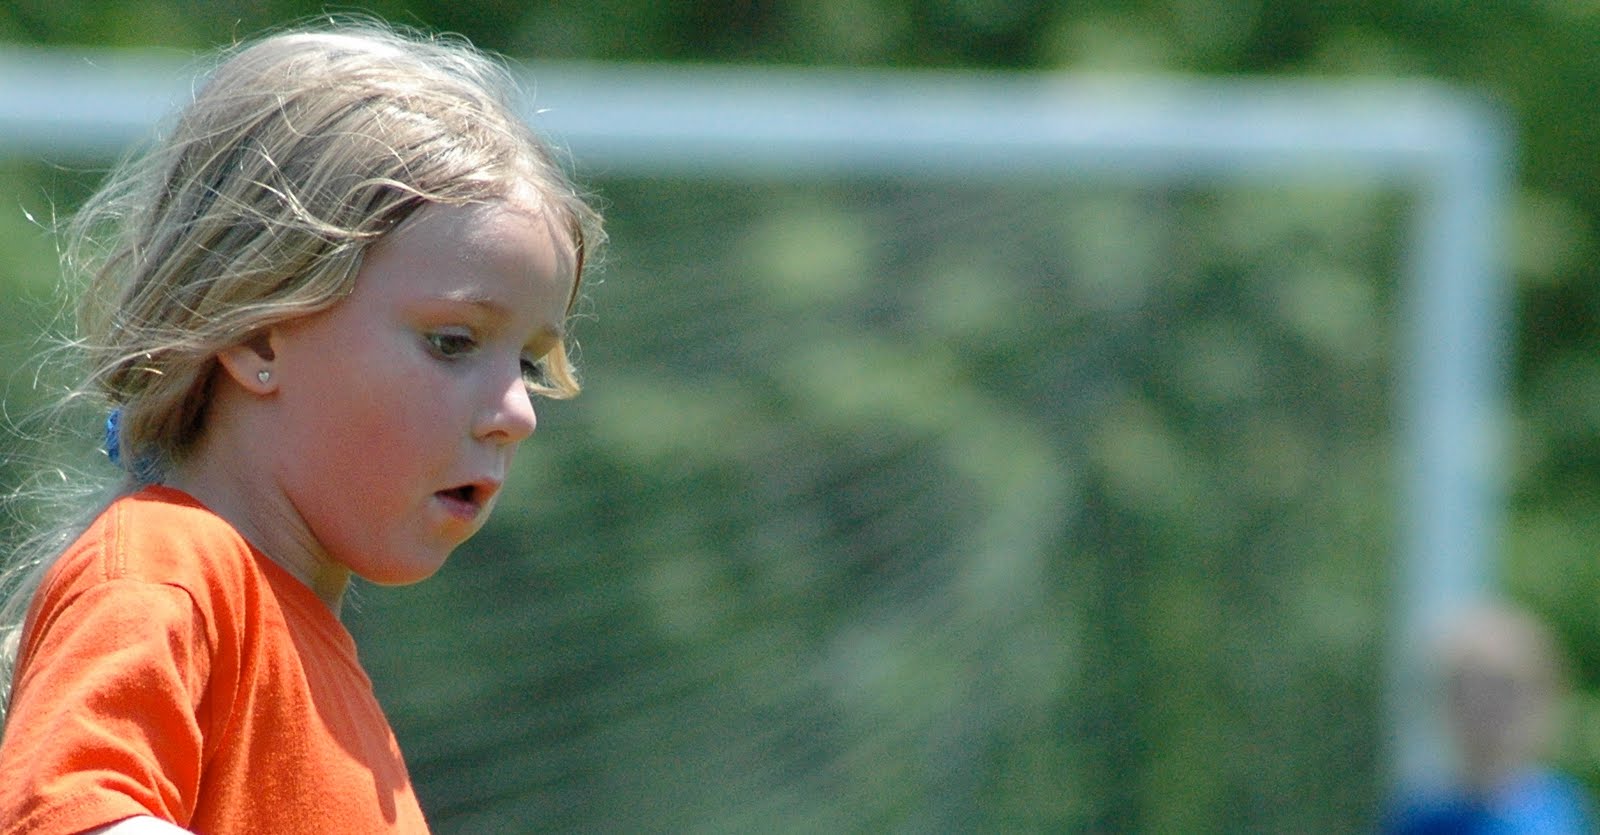 STATS DAD: Youth Soccer: The Earring Dilemma